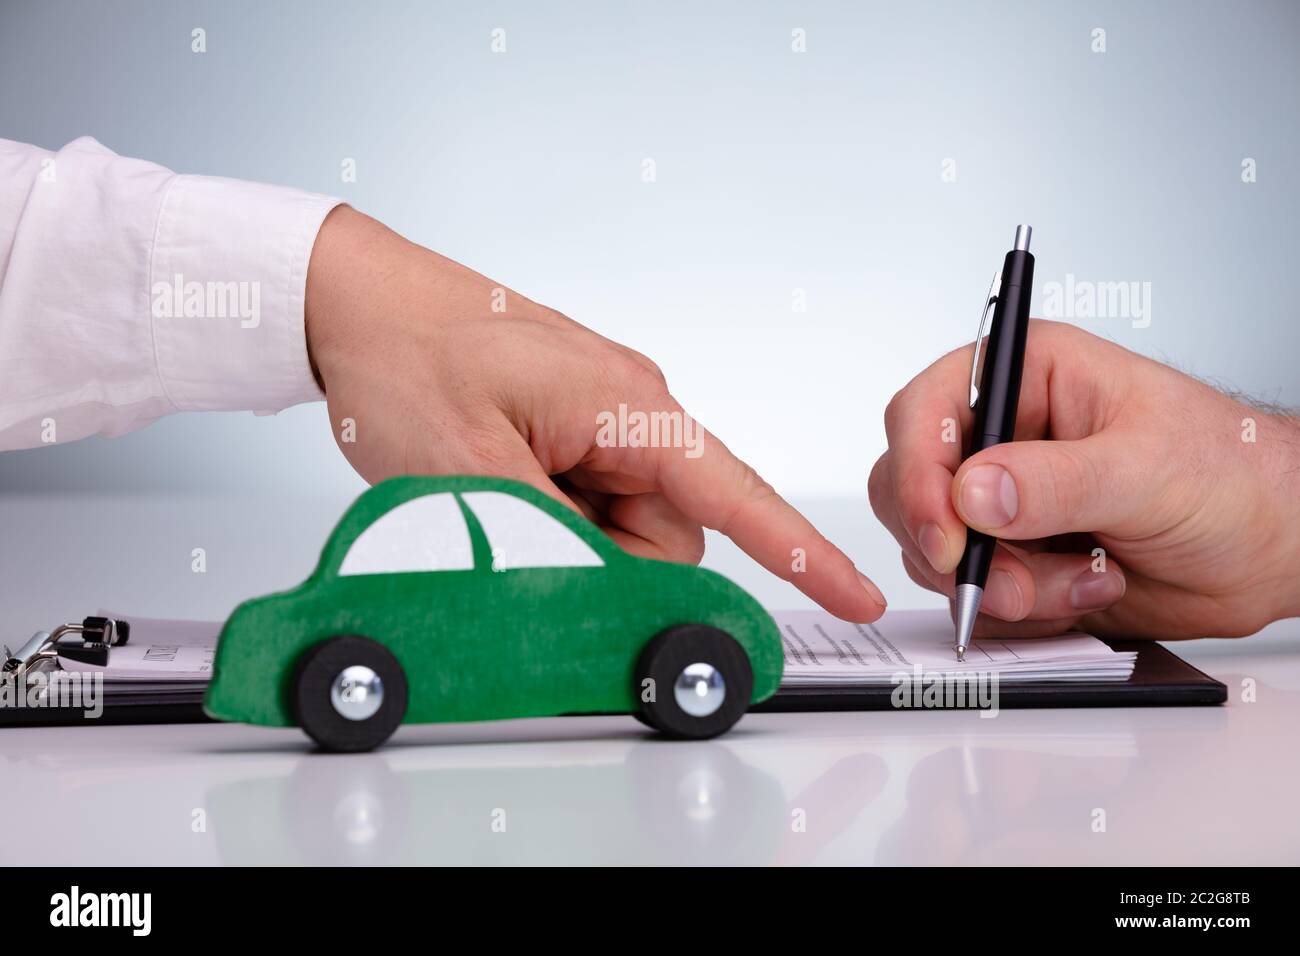 Close-up Of Man's Hand Signing Sales Contract For Car At Dealership Against Gray Background Stock Photo